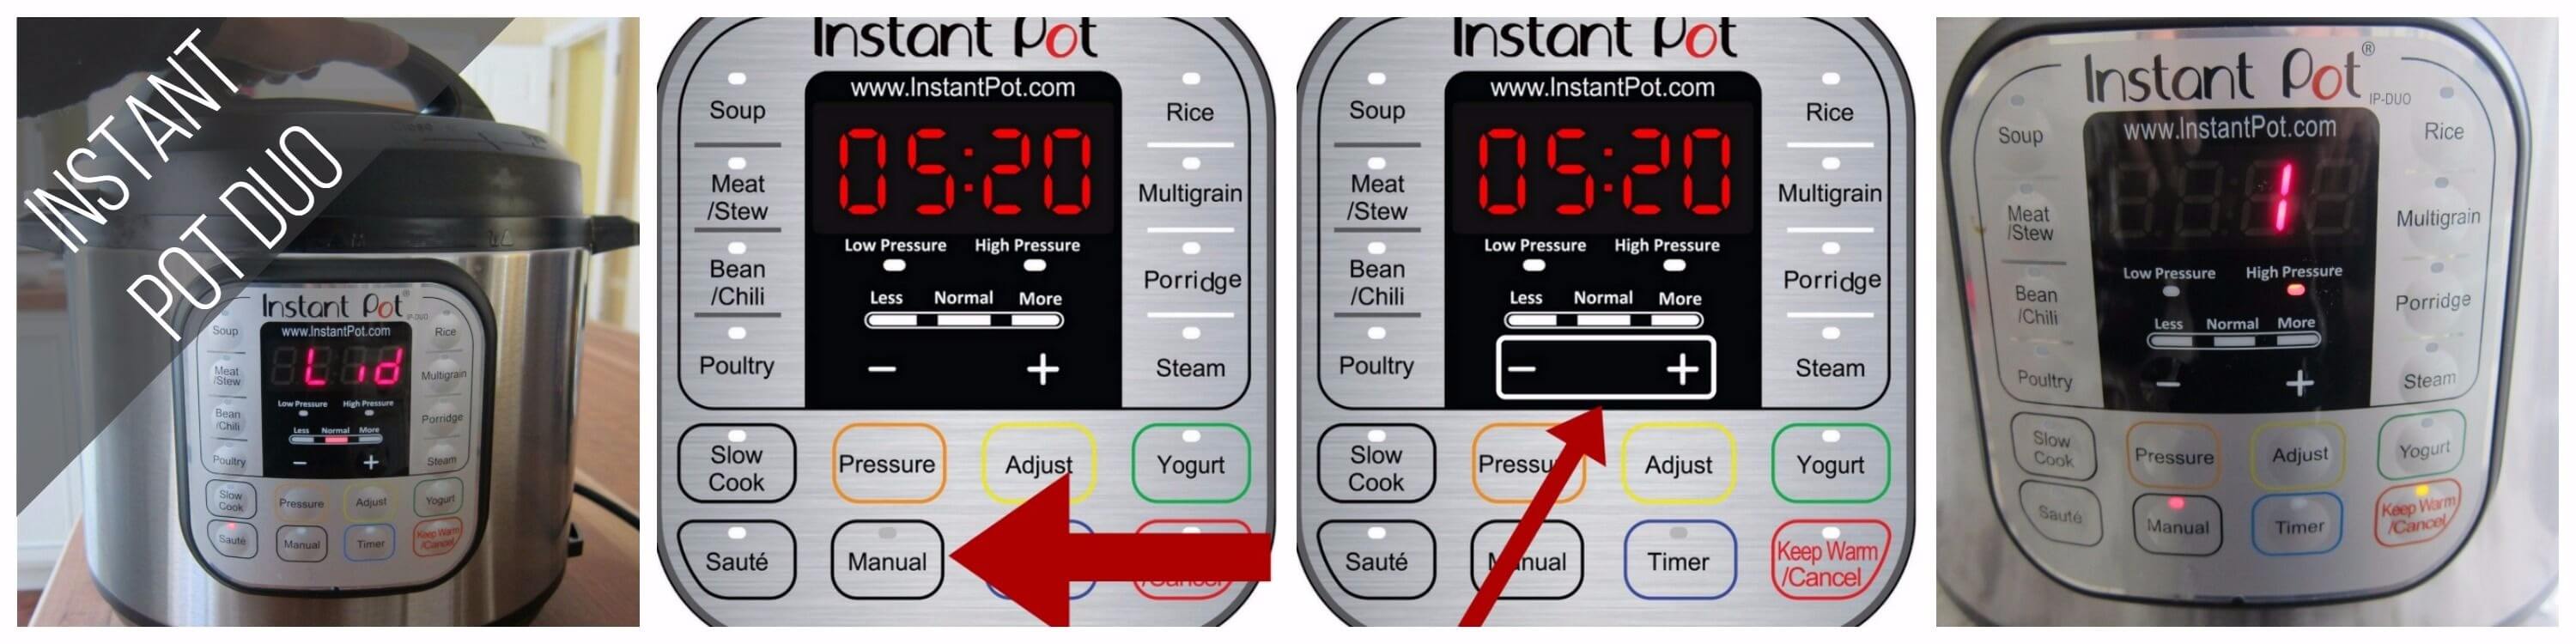 Instant Pot Duo Manual mode 1 minute collage - close lid, press manual, press - or +, display shows 1 - Paint the Kitchen Red